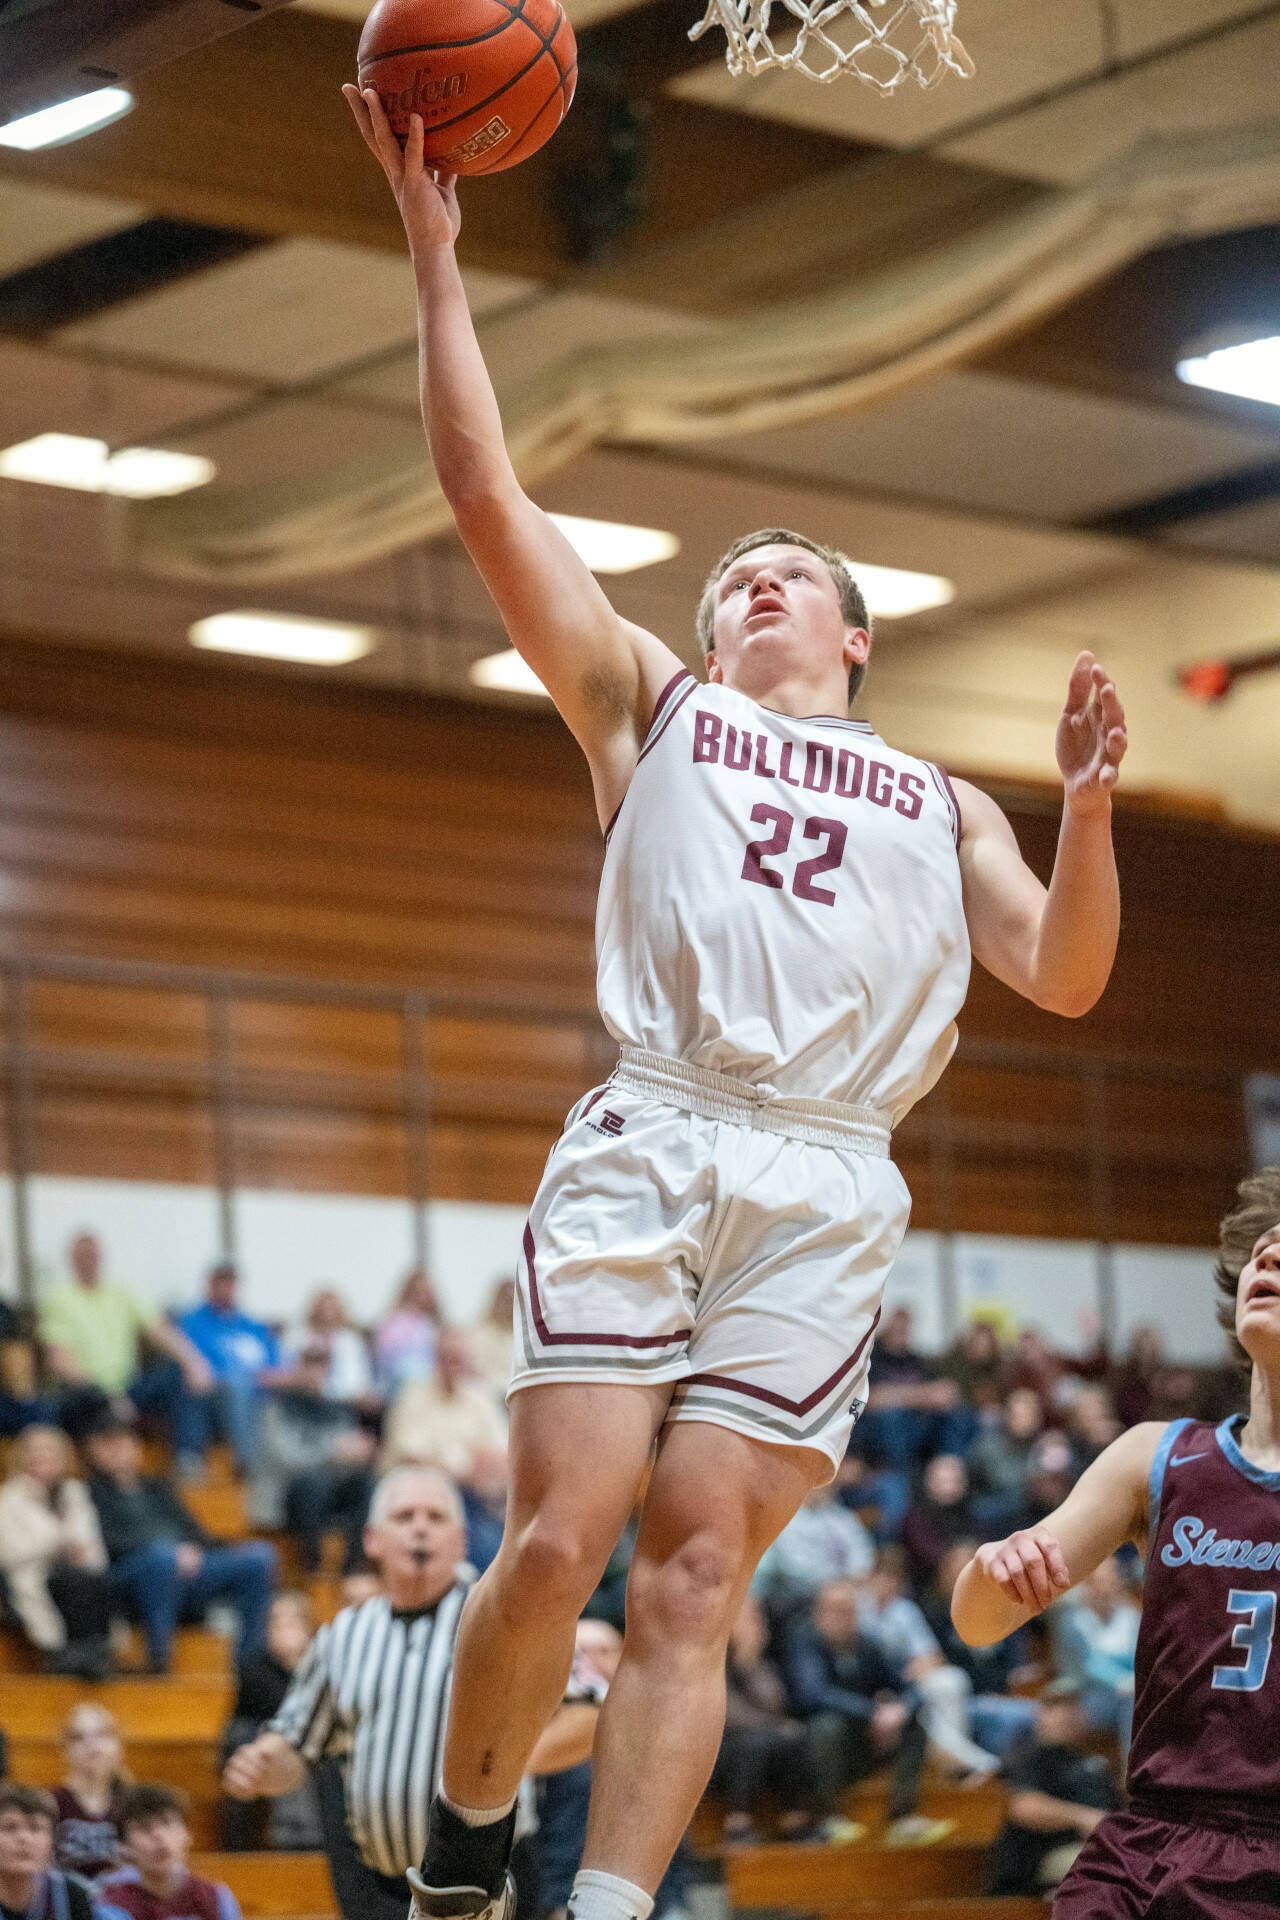 PHOTO BY FOREST WORGUM Montesano guard Peyton Damasiewicz scores on a layup during a 75-58 victory over Stevenson in a 1A District 4 Tournament game on Wednesday in Montesano.